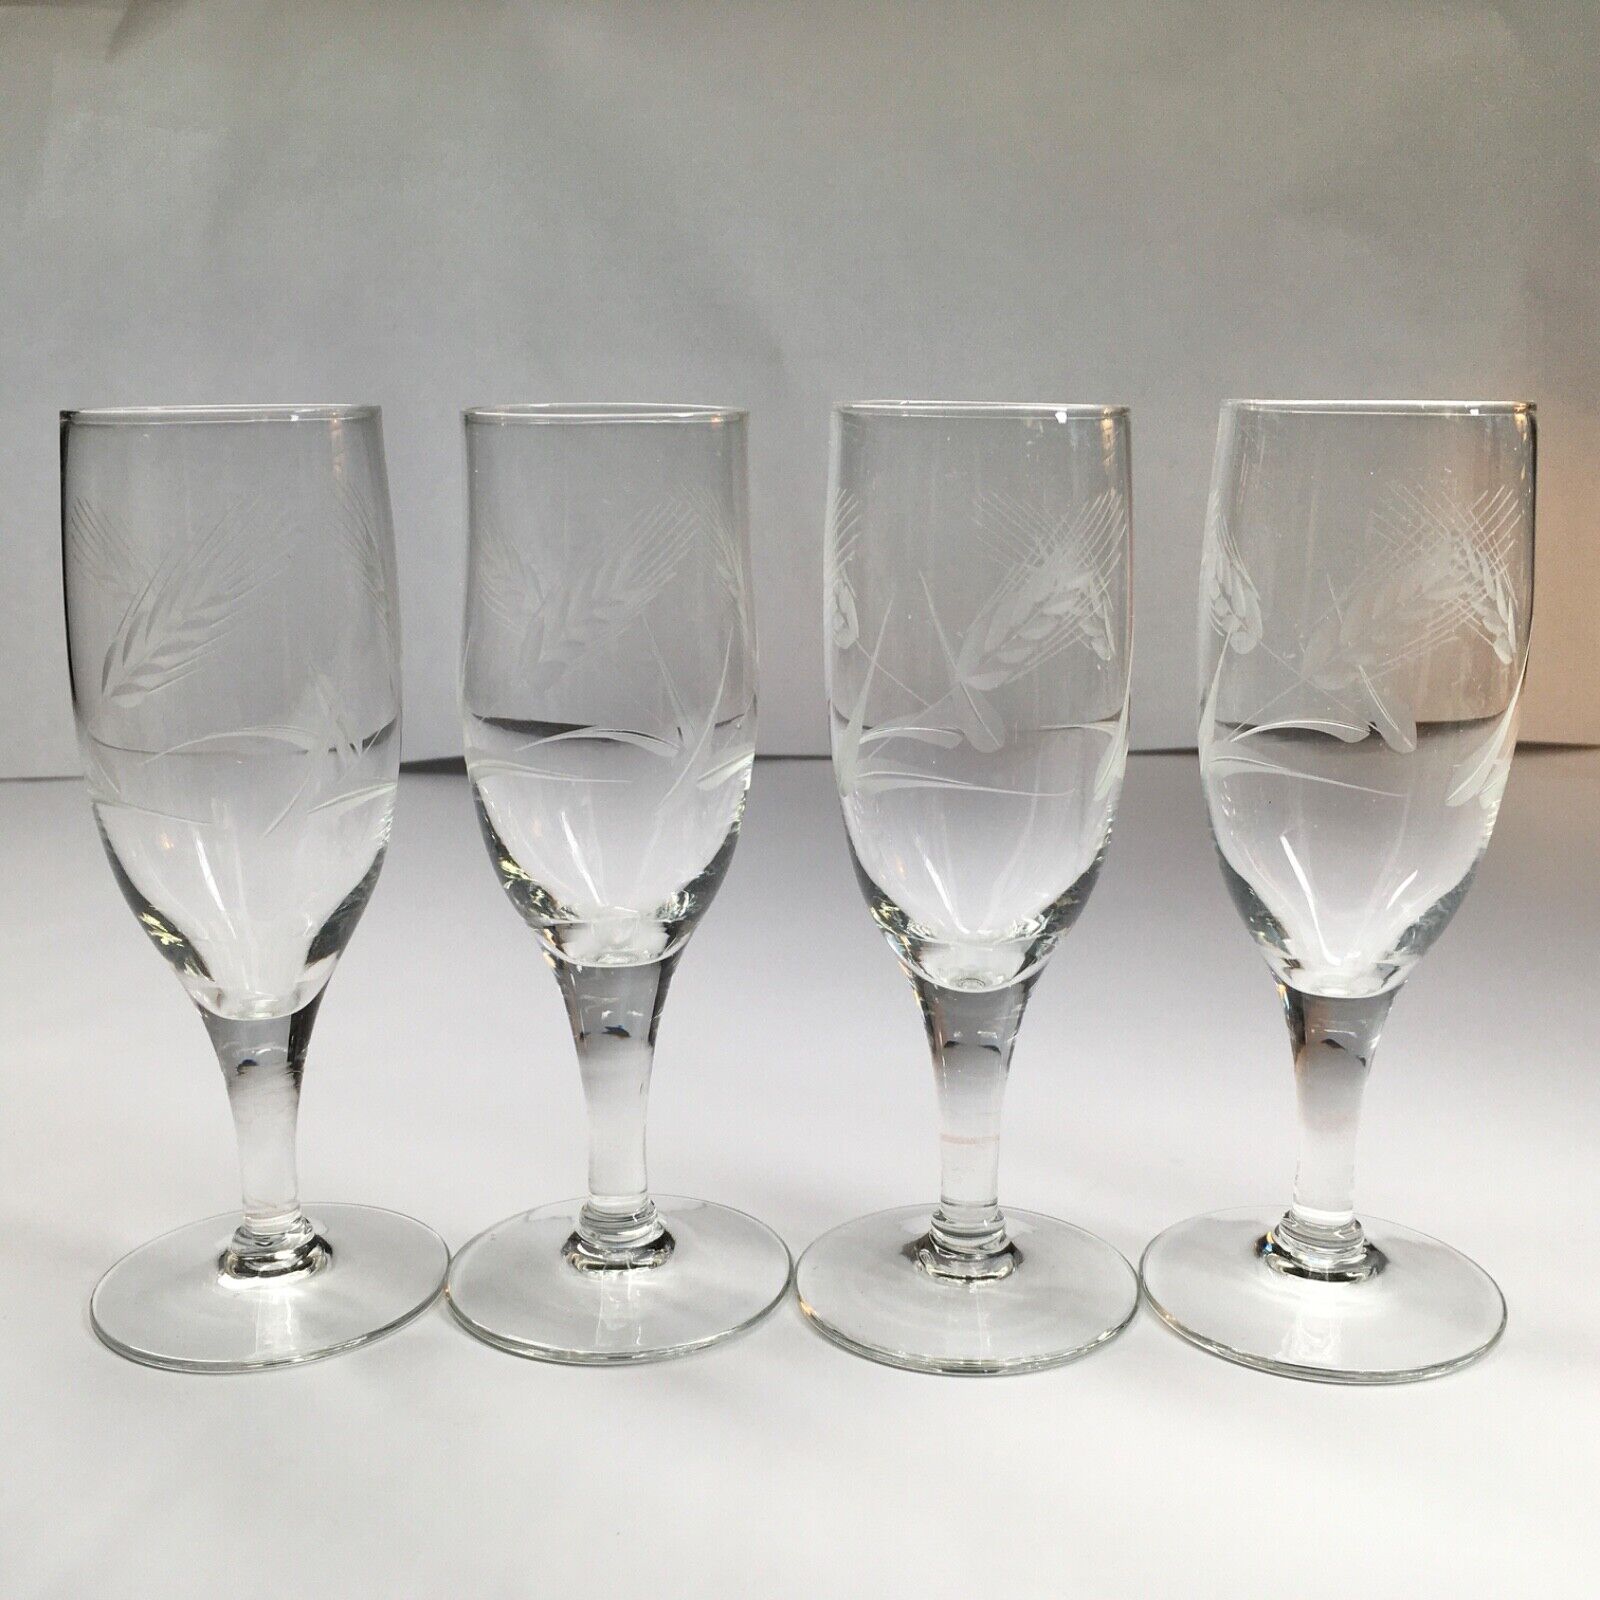 Vintage Wheat Glass Sherry Or Liquor Goblets, Etched Wheat Stemmed Glasses 5.5”